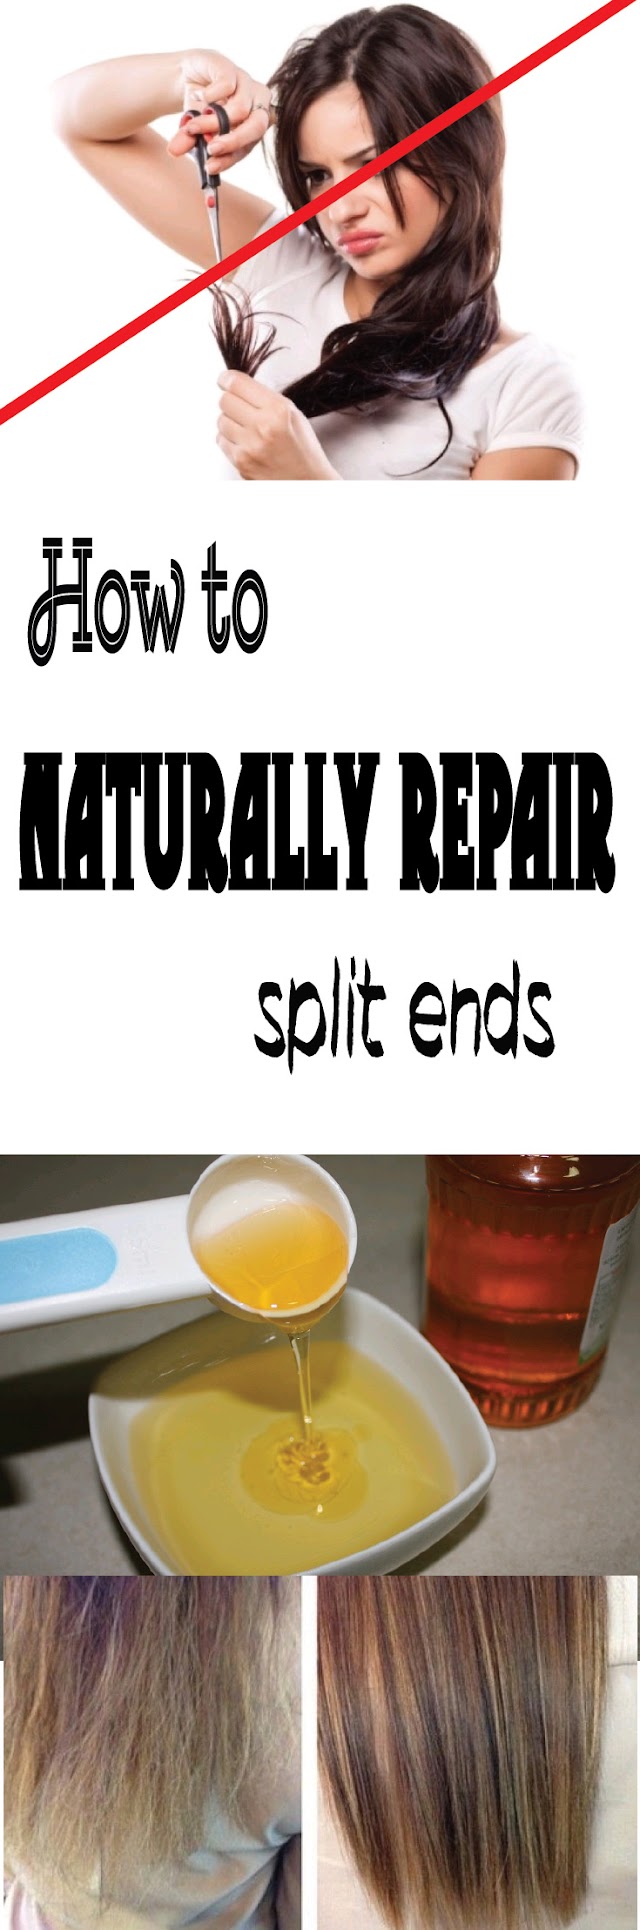 How to naturally repair split ends